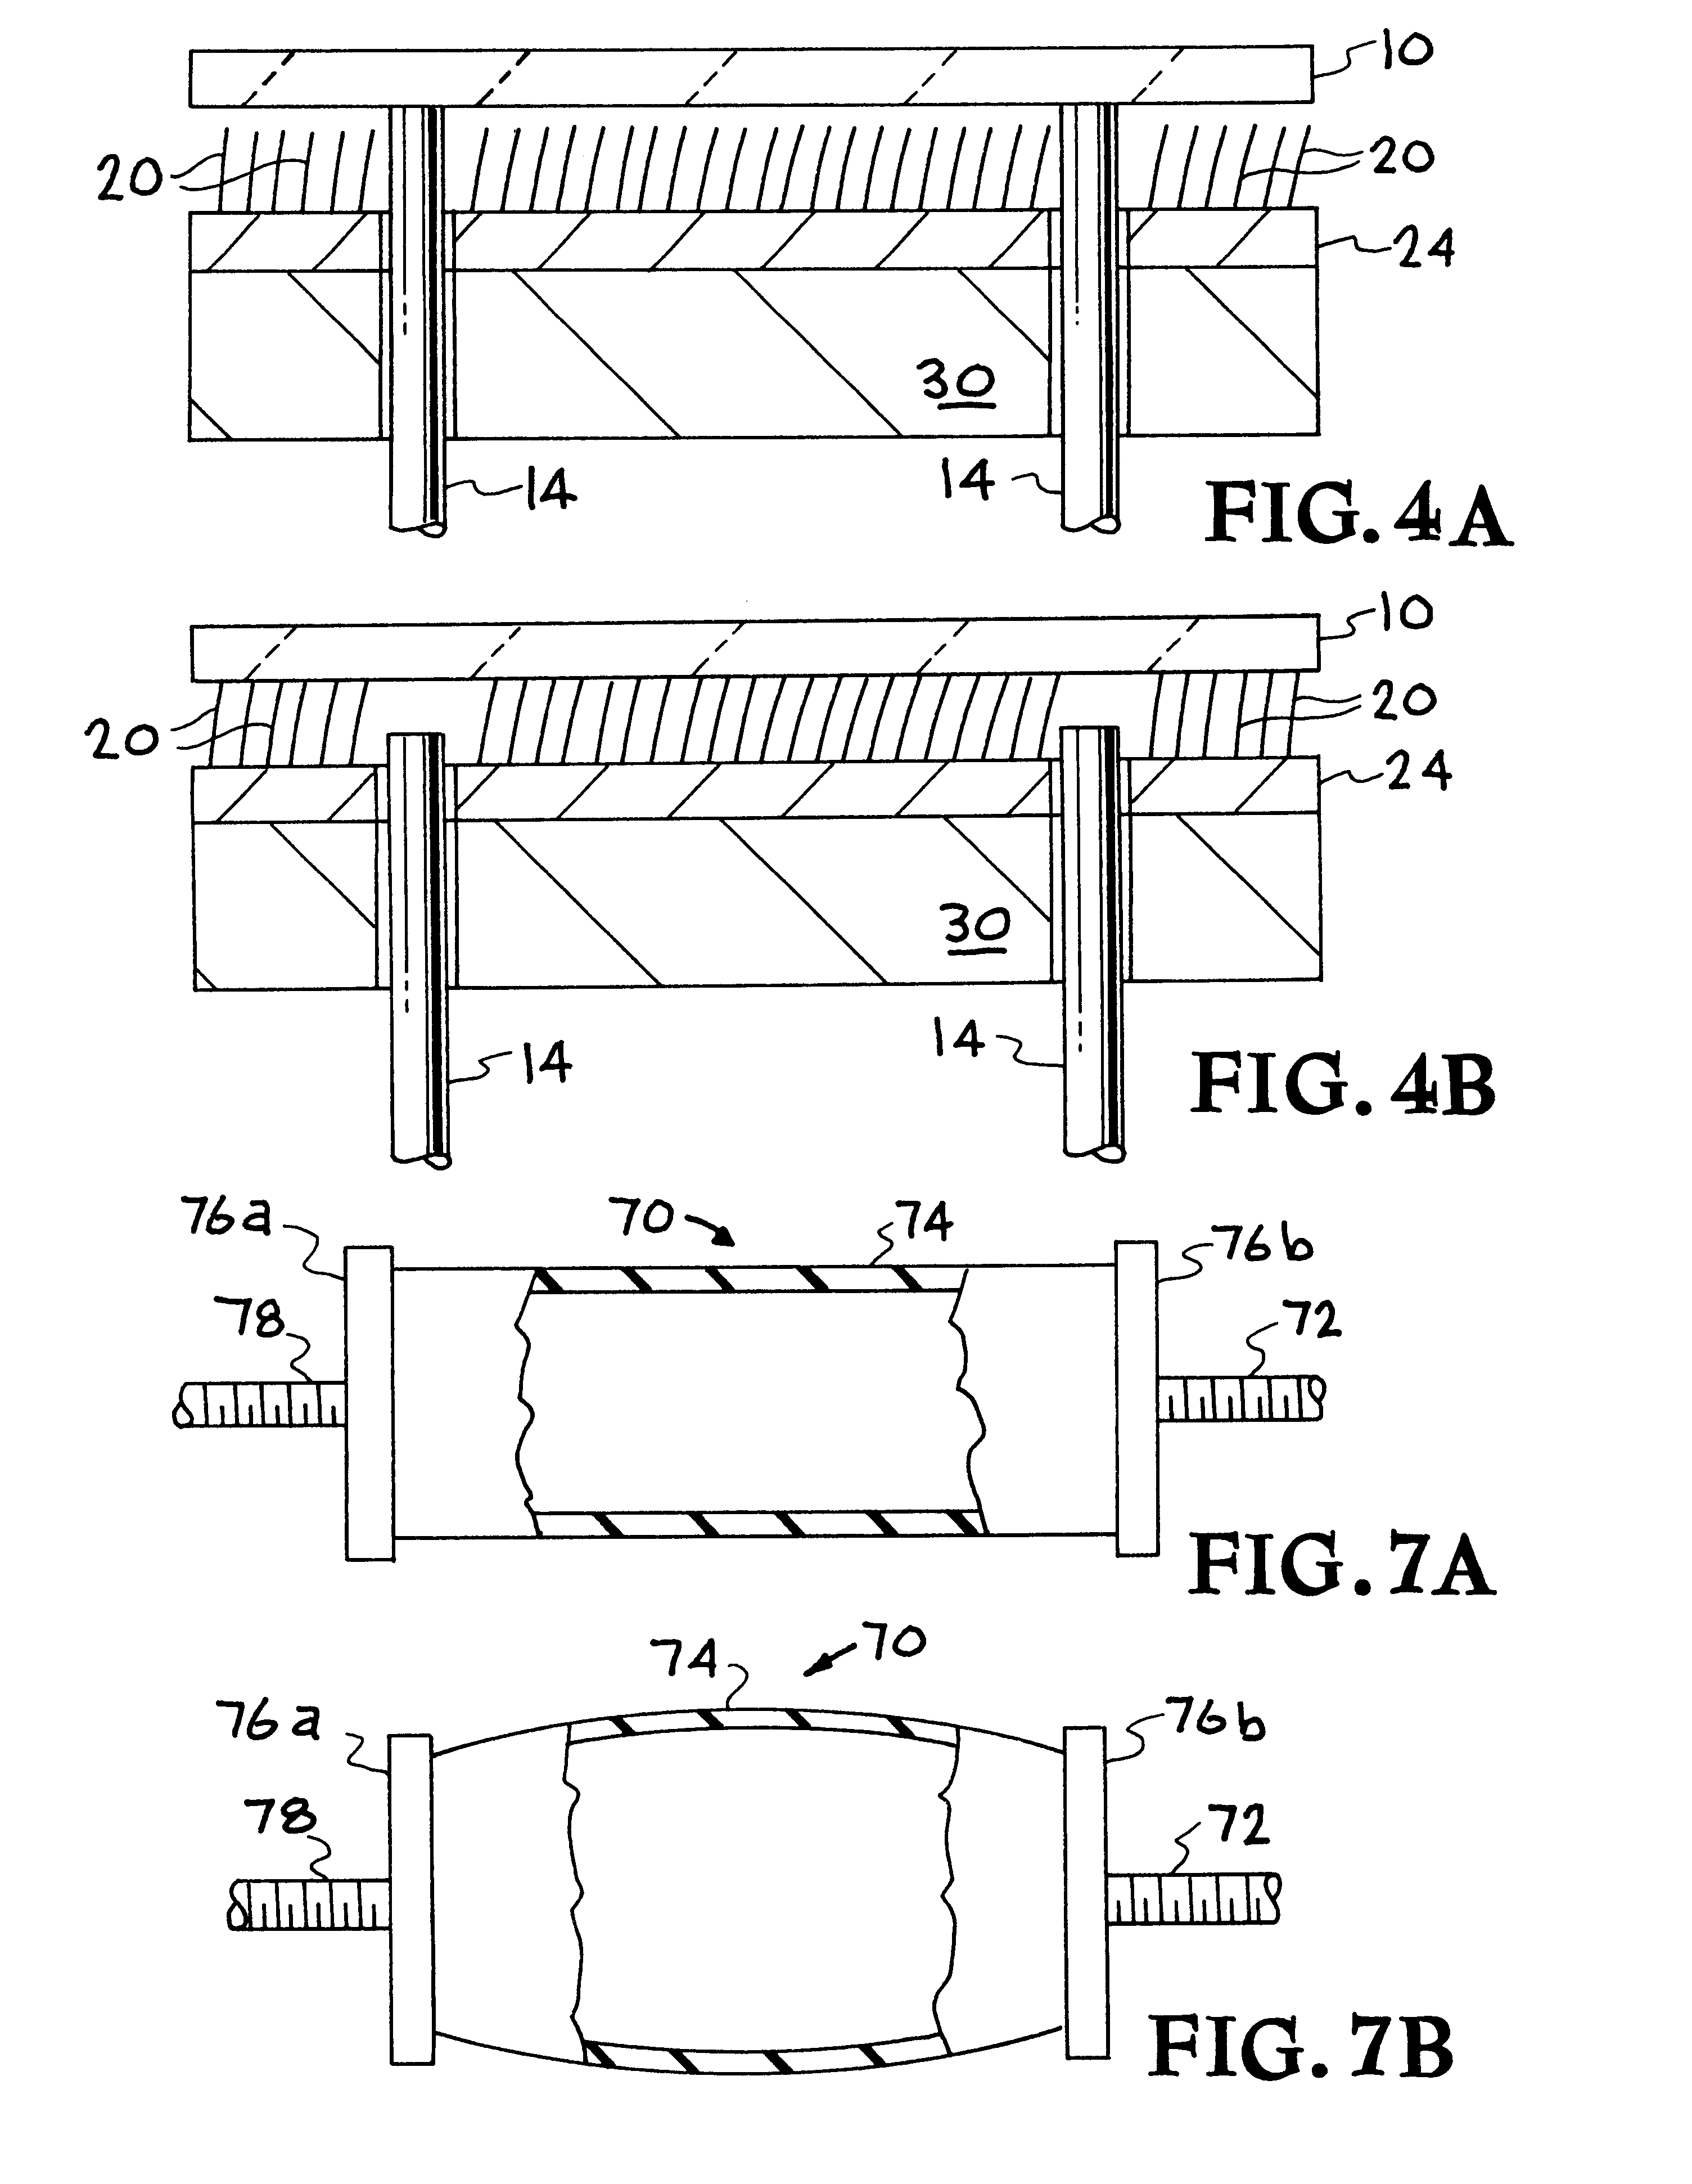 Apparatus and method for removably adhering a semiconductor substrate to a substrate support